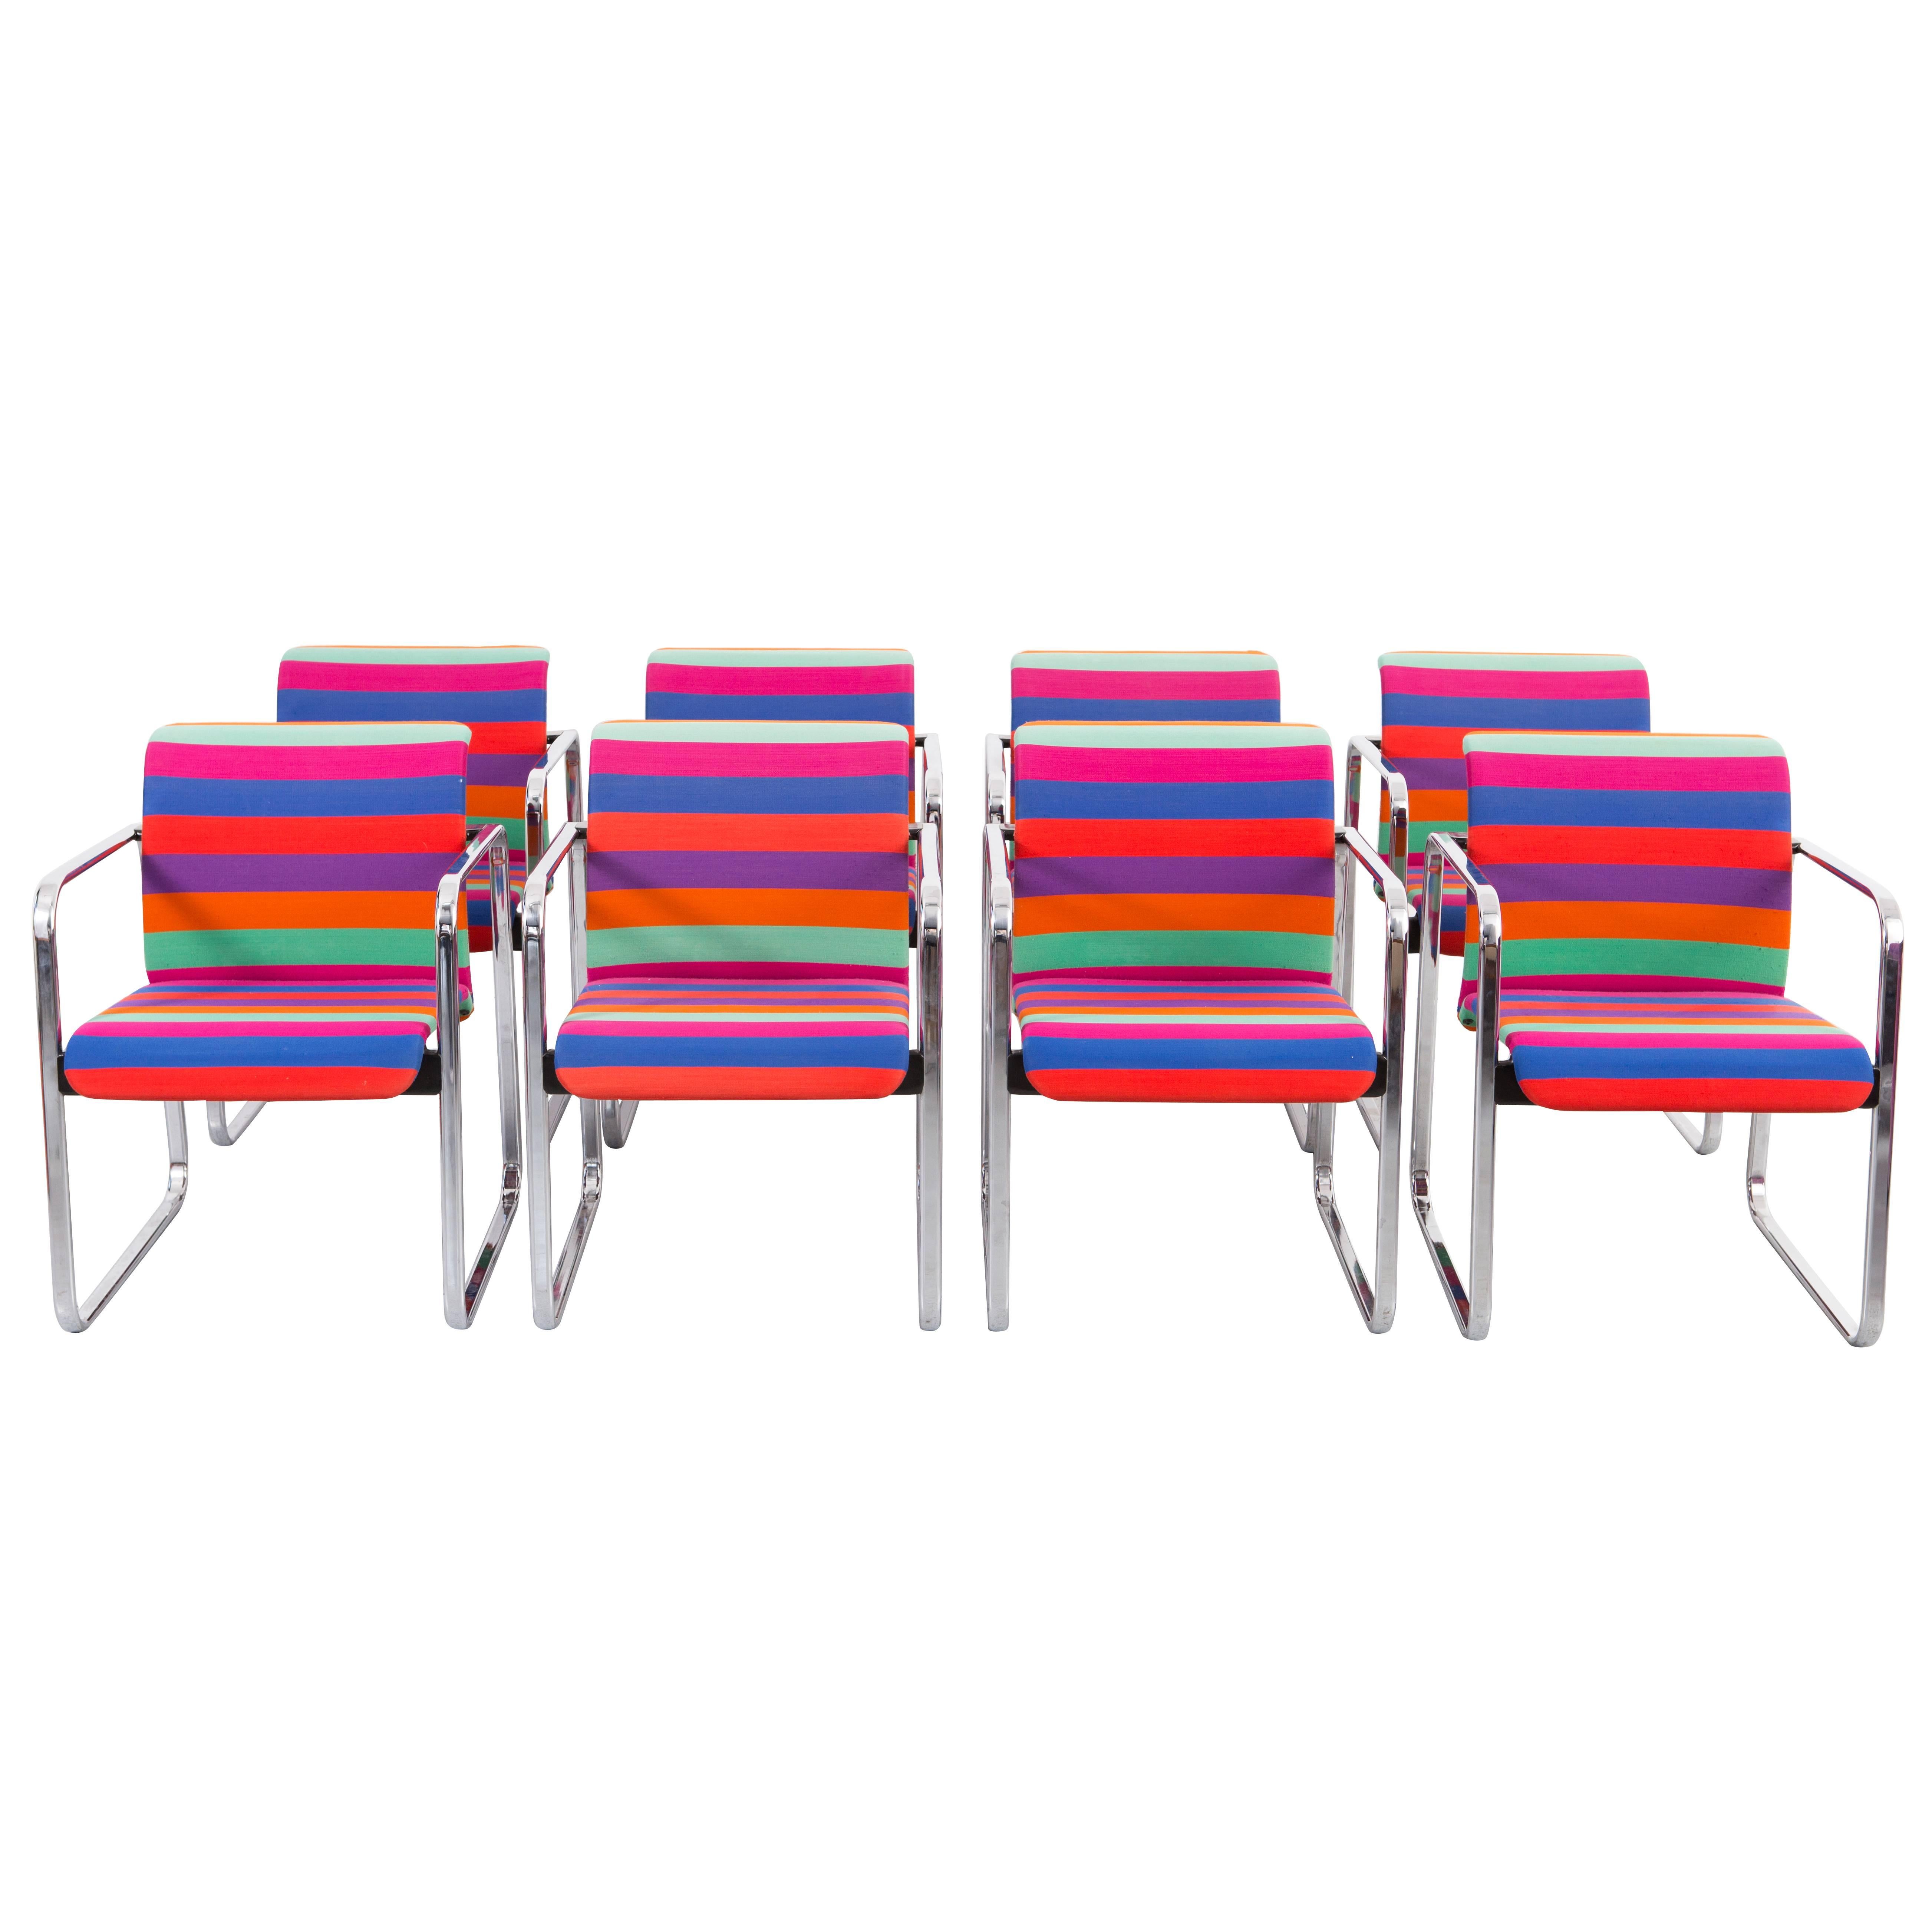 Chromatic and Vibrant Conference or Dining Chair Set in Alexander Girard Fabric